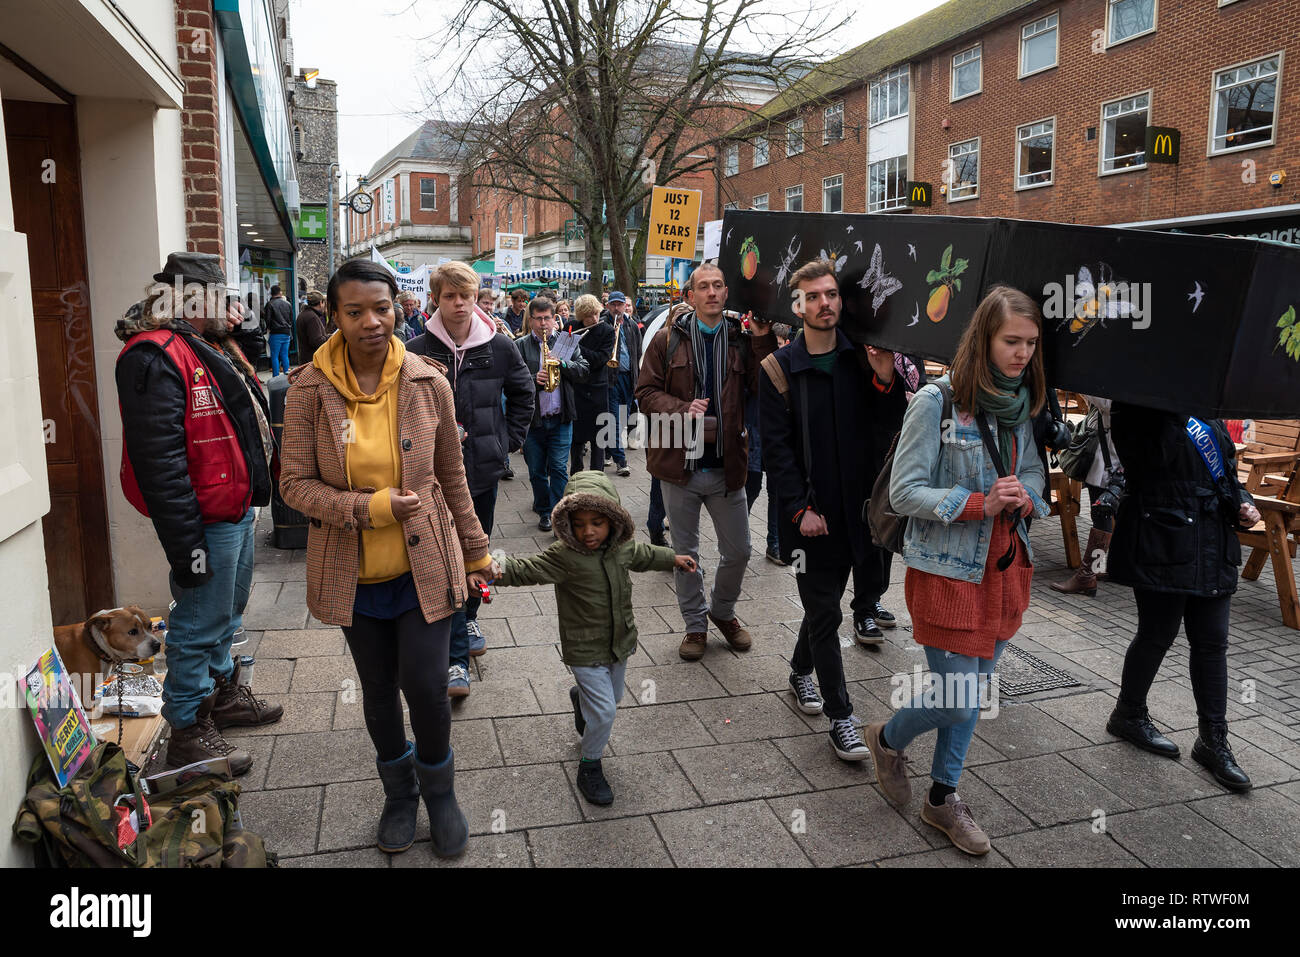 Canterbury, UK. 23rd February 2019. Supporters of the Canterbury Extinction Rebellion Group form up in the City Centre then take part in a symbolic funeral procession representing the death of plants, animals, humans and the planet due to the climate crisis, loss or life. The protest culminated in a swarming action blocking St. Peters Place. Police were present but didn't interfere, there were no arrests. Credit: Stephen Bell/Alamy Live News Stock Photo